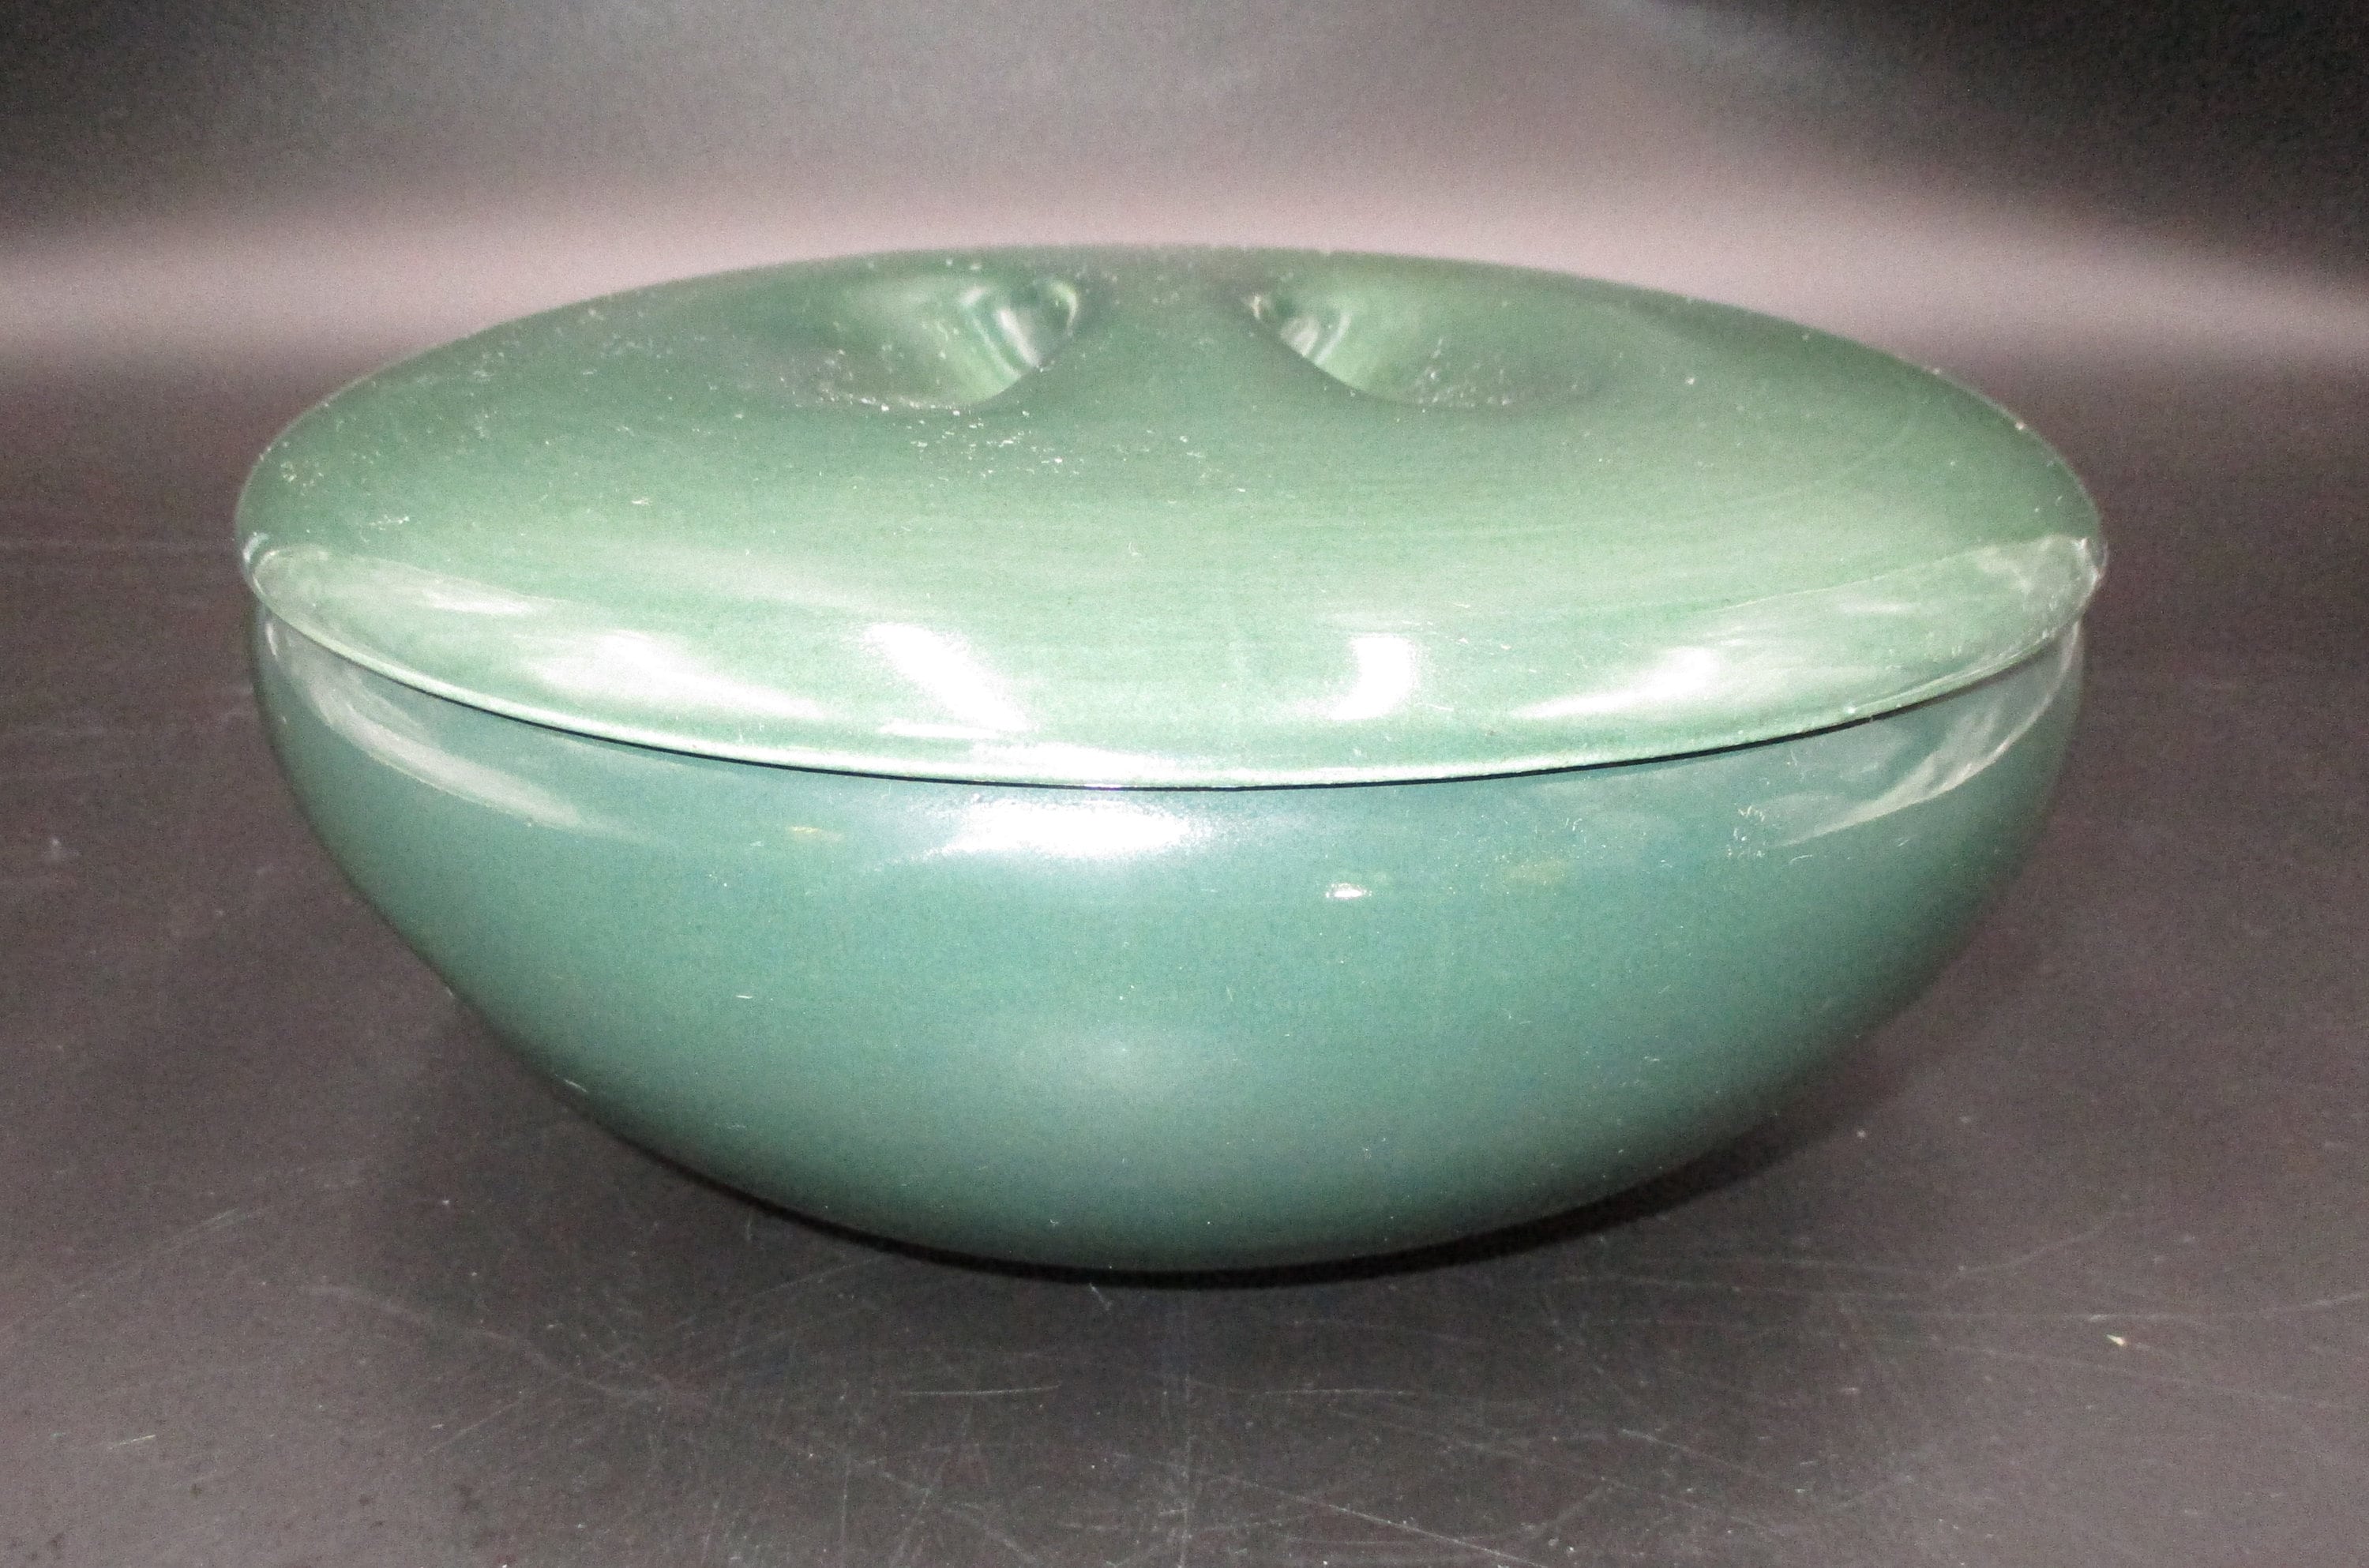 Parsley Bowl Just a Pinch of Parsley Porcelain set of 2 